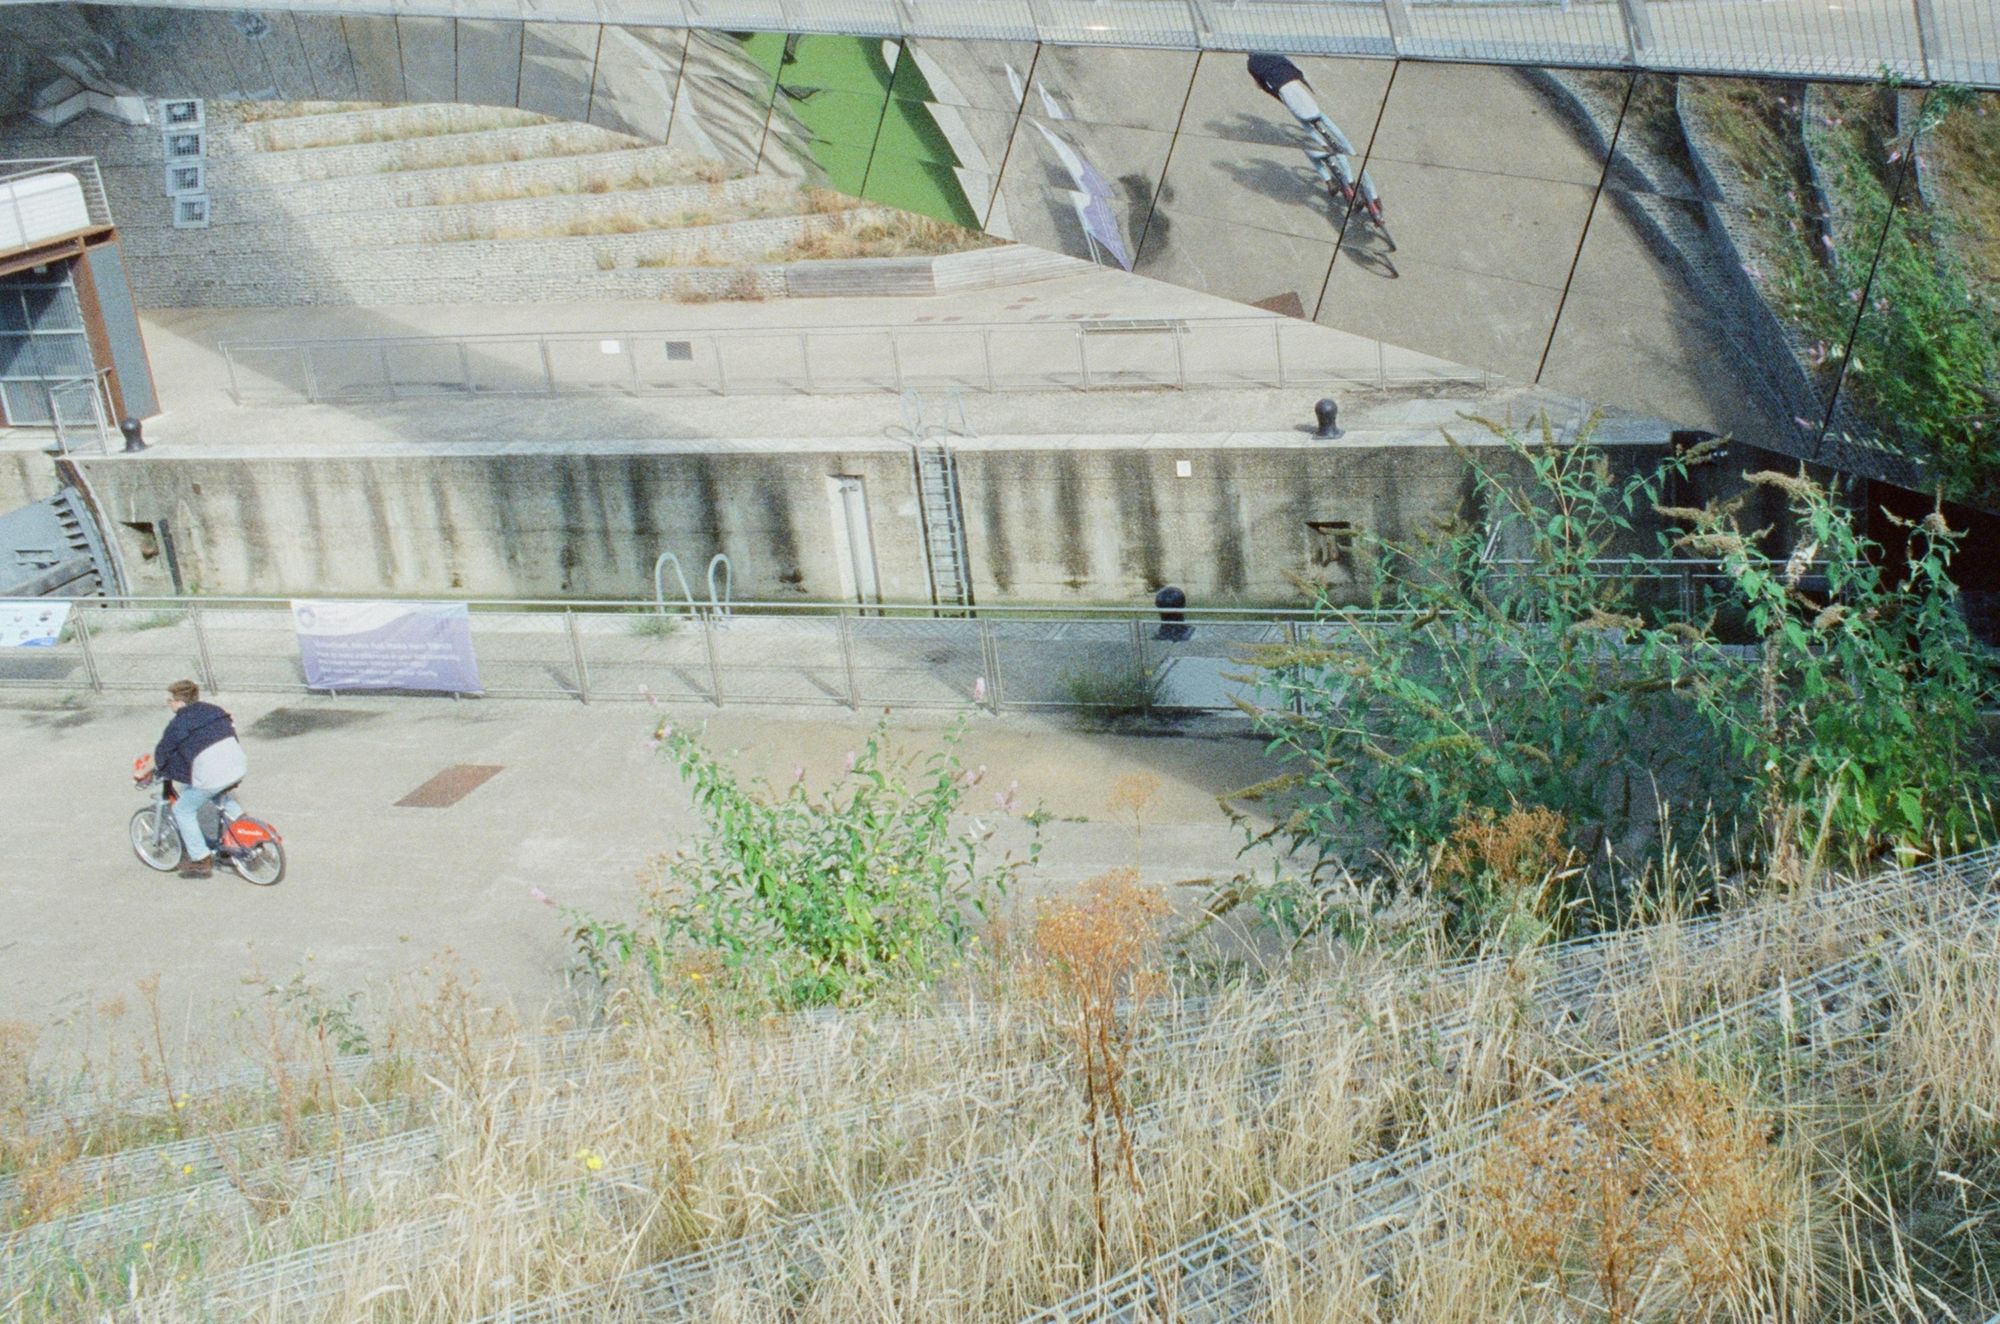 Down onto a canal towpath as someone cycles away on a hire bike. They are reflected in a curved bridge soaring above with reflective panels on the underside.